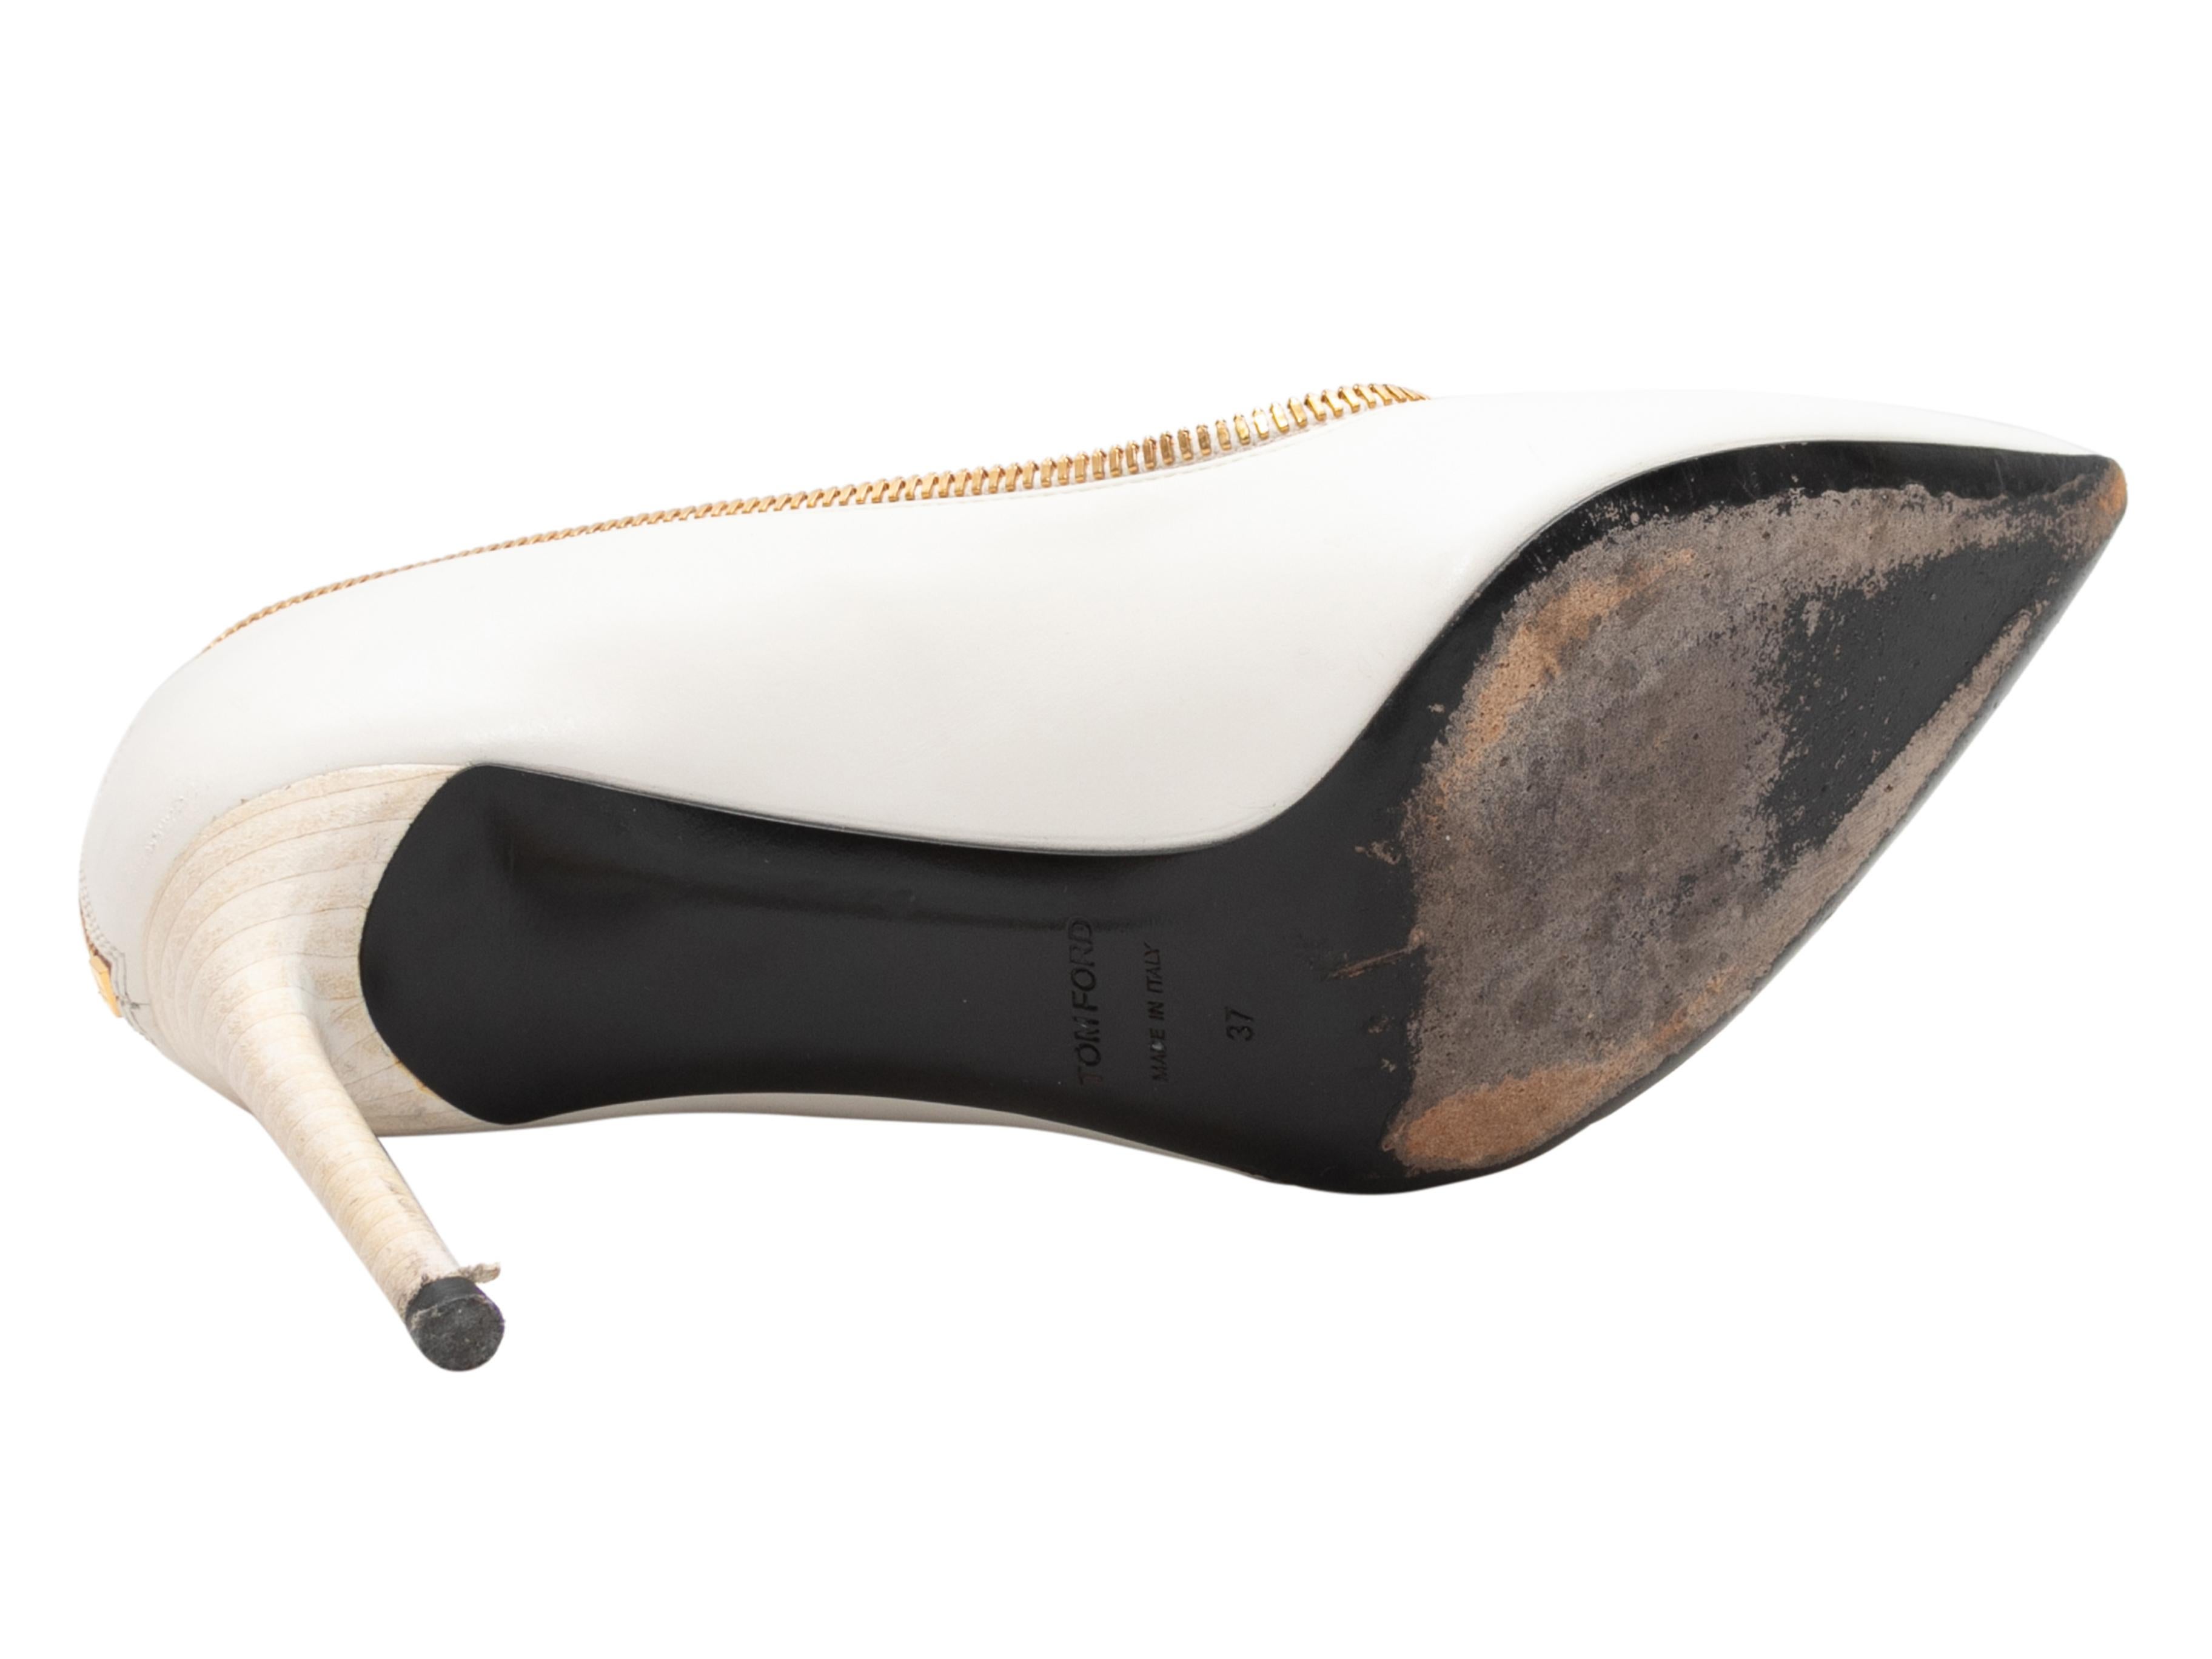 White and gold-tone pointed-toe zipper pumps by Tom Ford. Stacked heels. 3.25